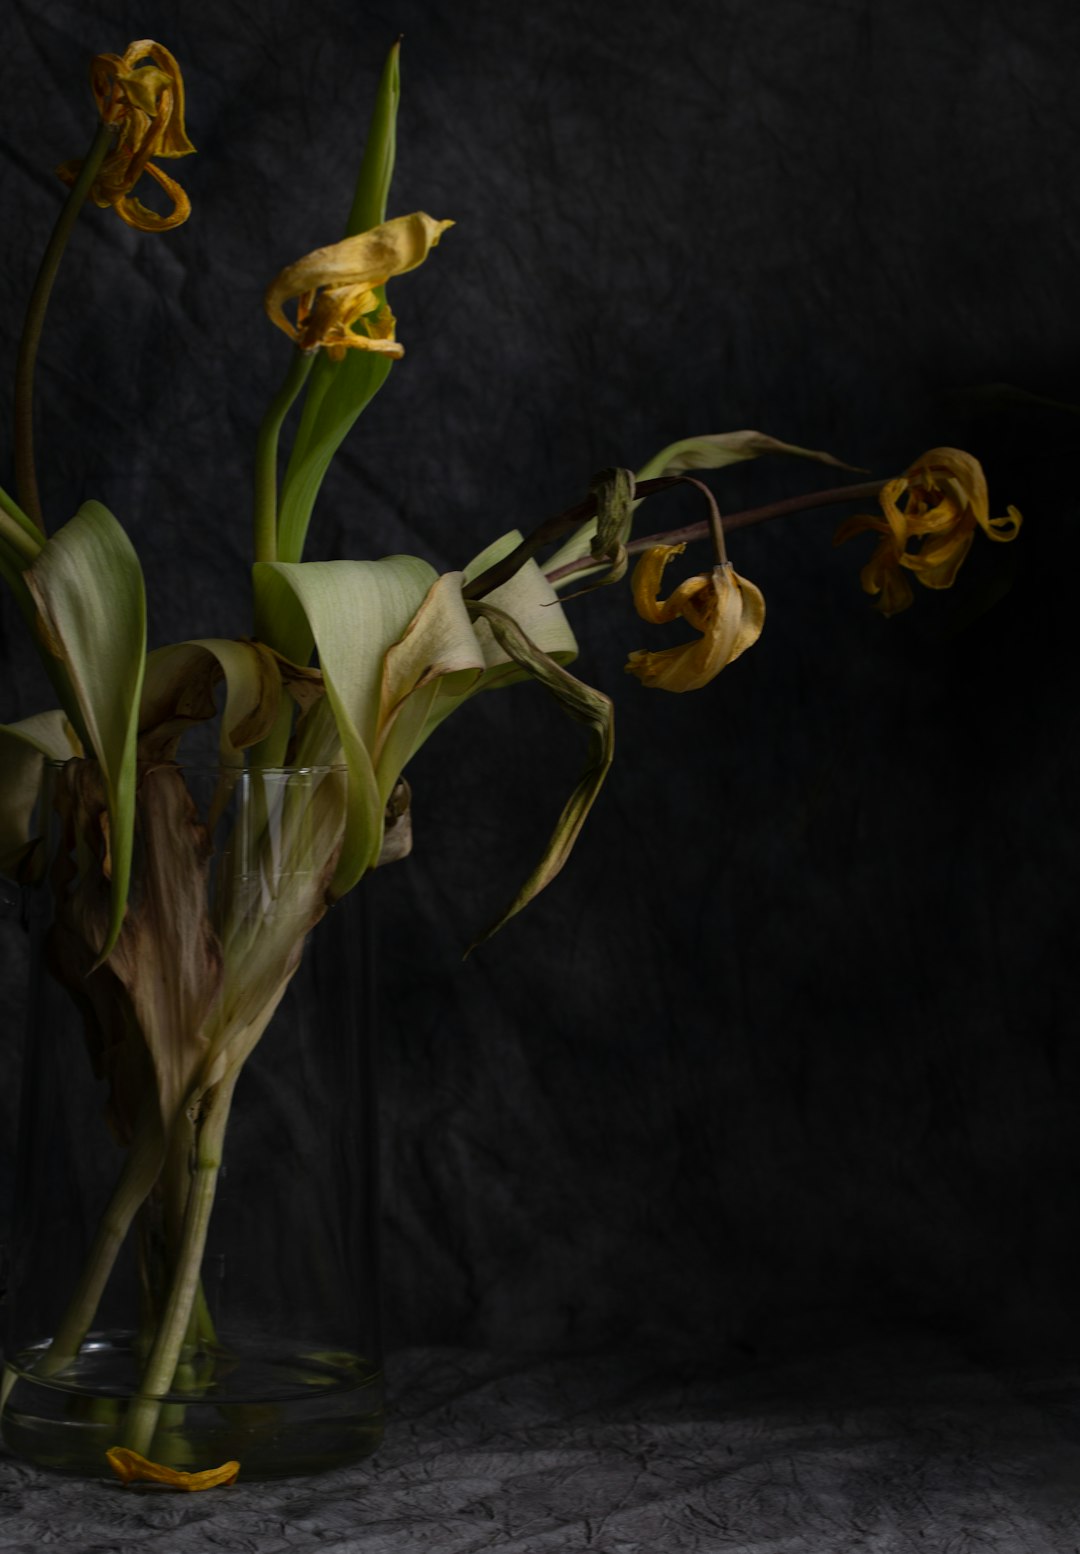 Still Life: Cut Flowers. There is beauty in impermanence; appreciate the fleetingness and transience of cut flowers.